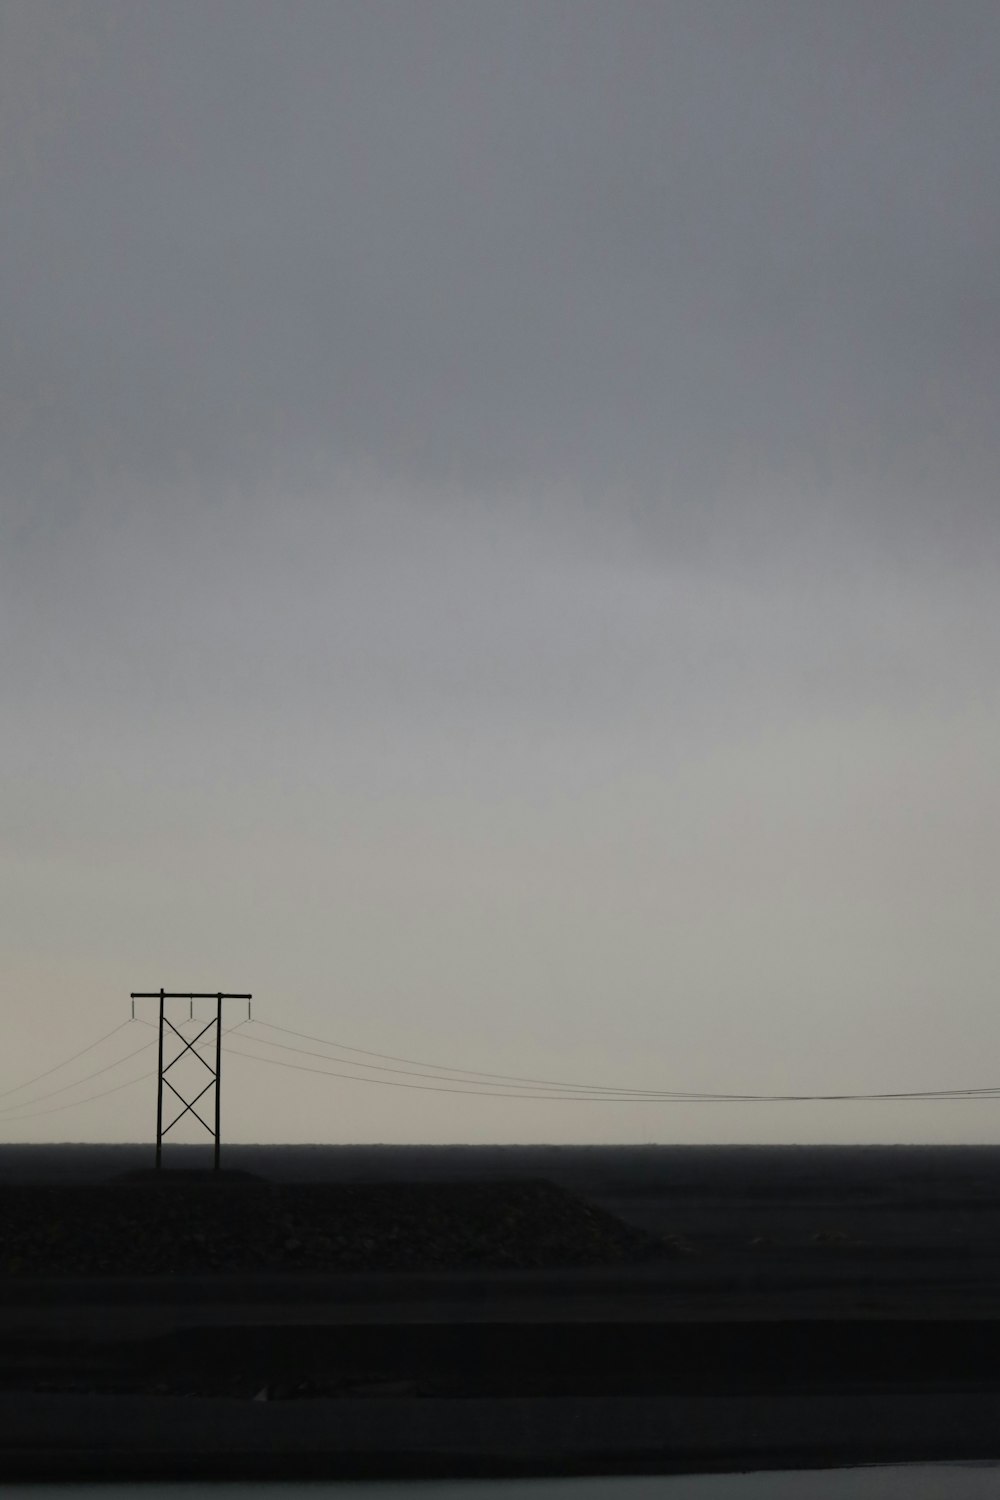 a power line in the distance under a cloudy sky